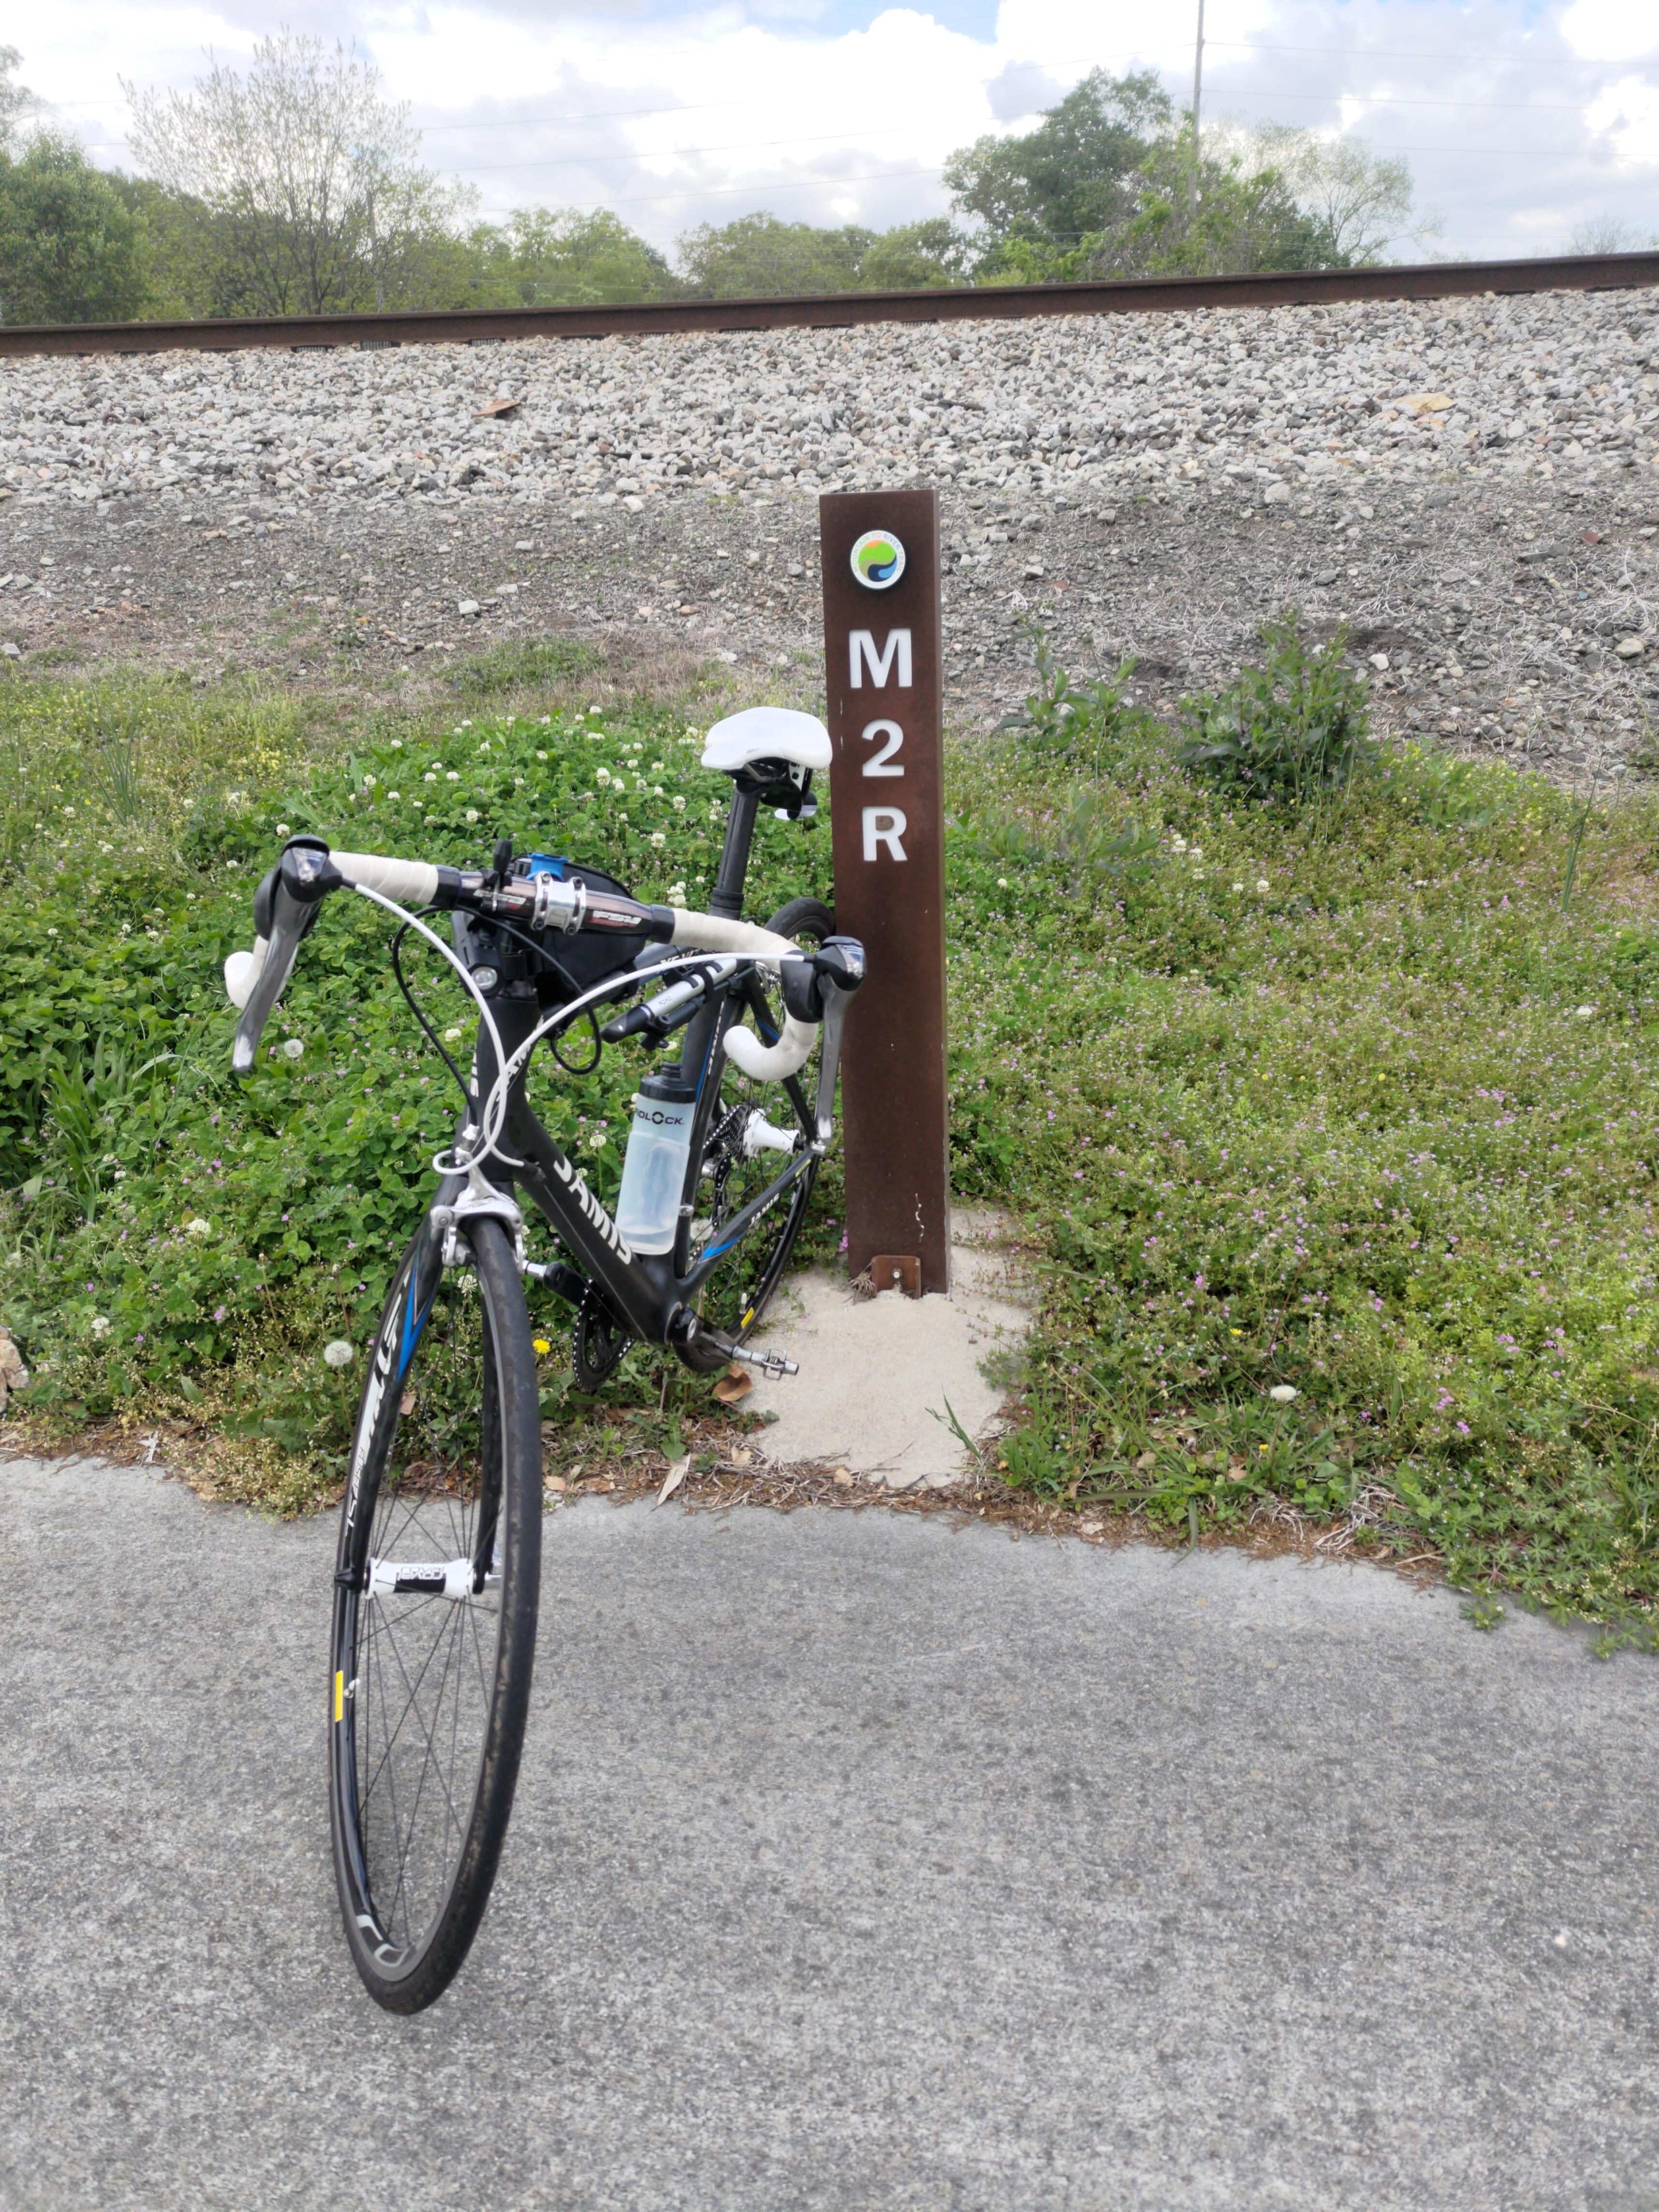 A black and white road bike sits propped against a trail marker that says 'M2R', there are some train tracks up an embankment in the background